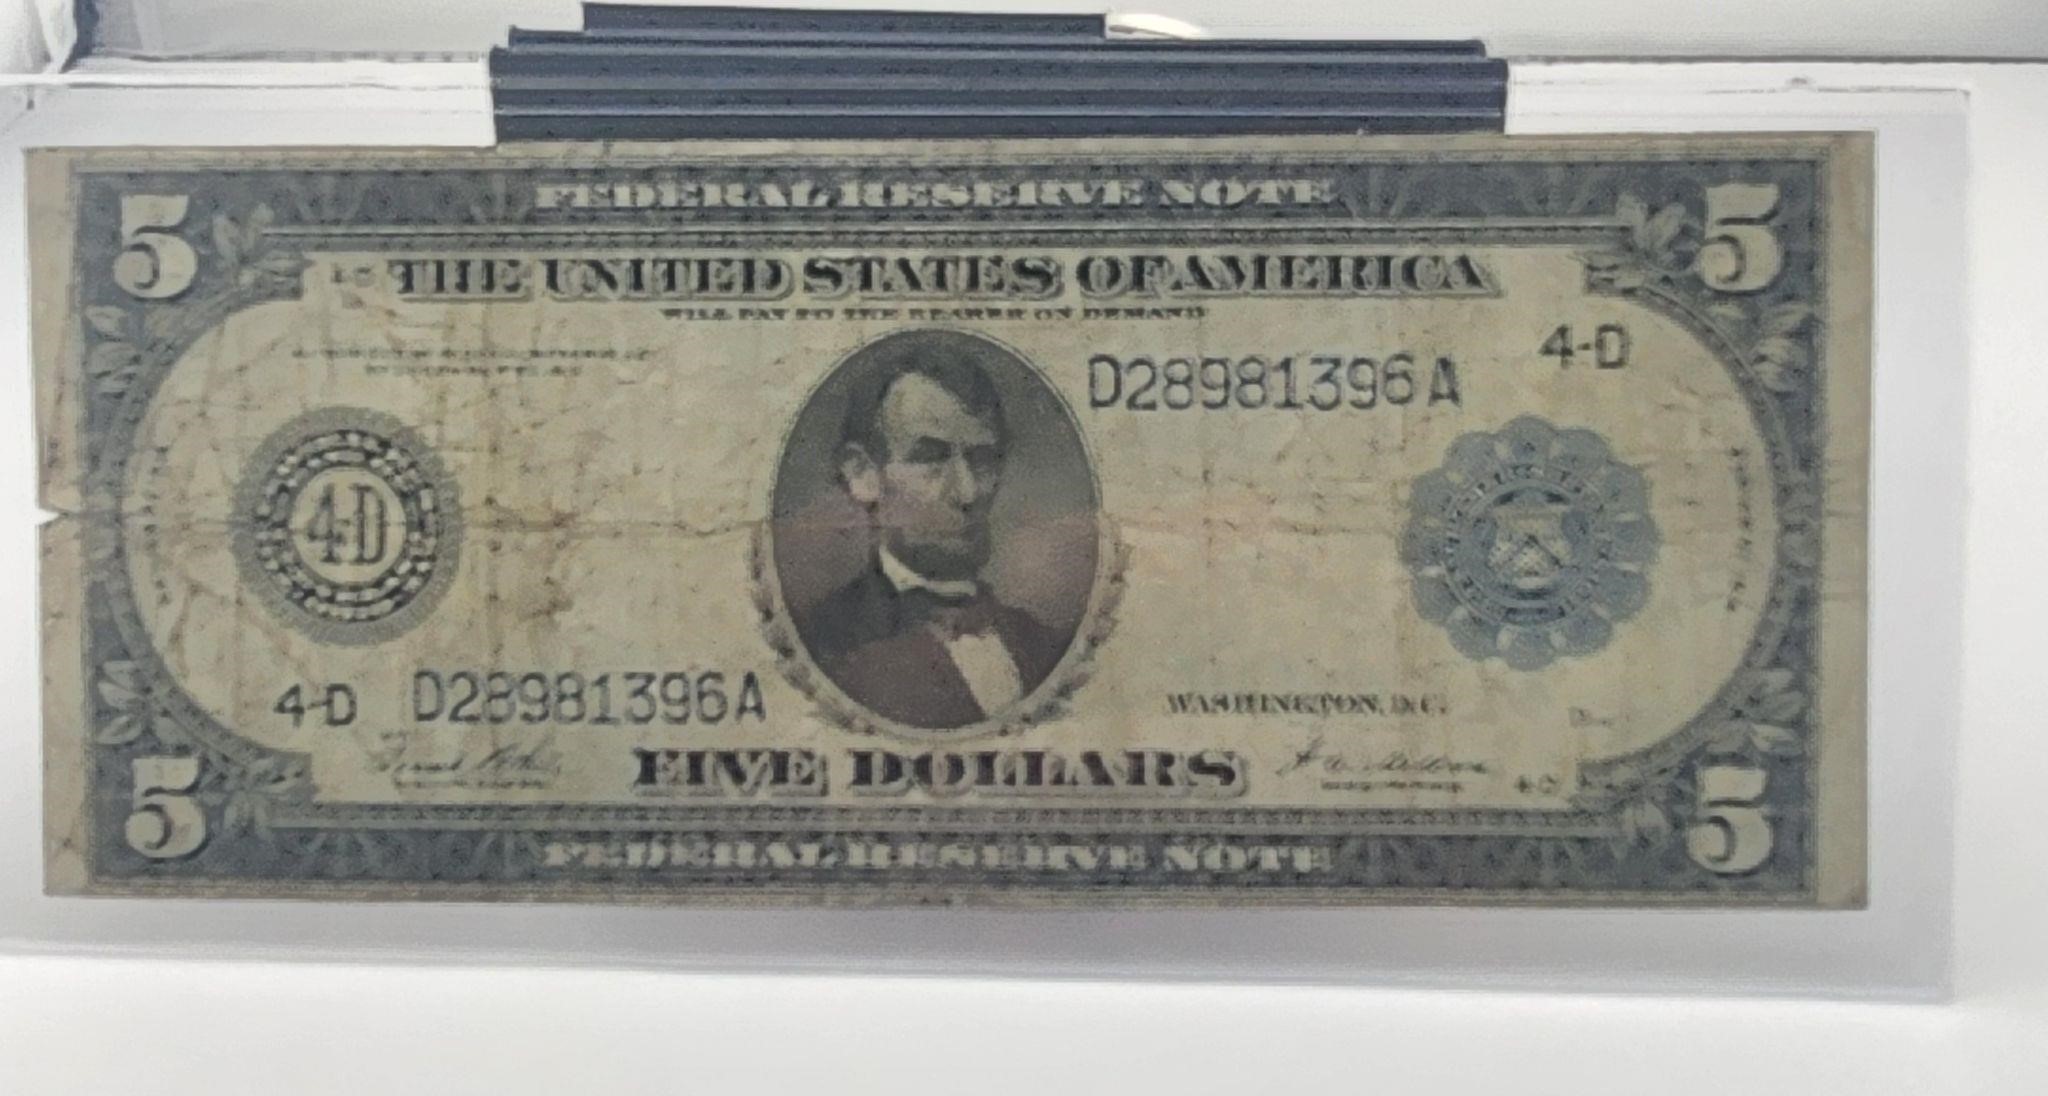 1914 $5 Dollar Federal Reserve Note Cleveland